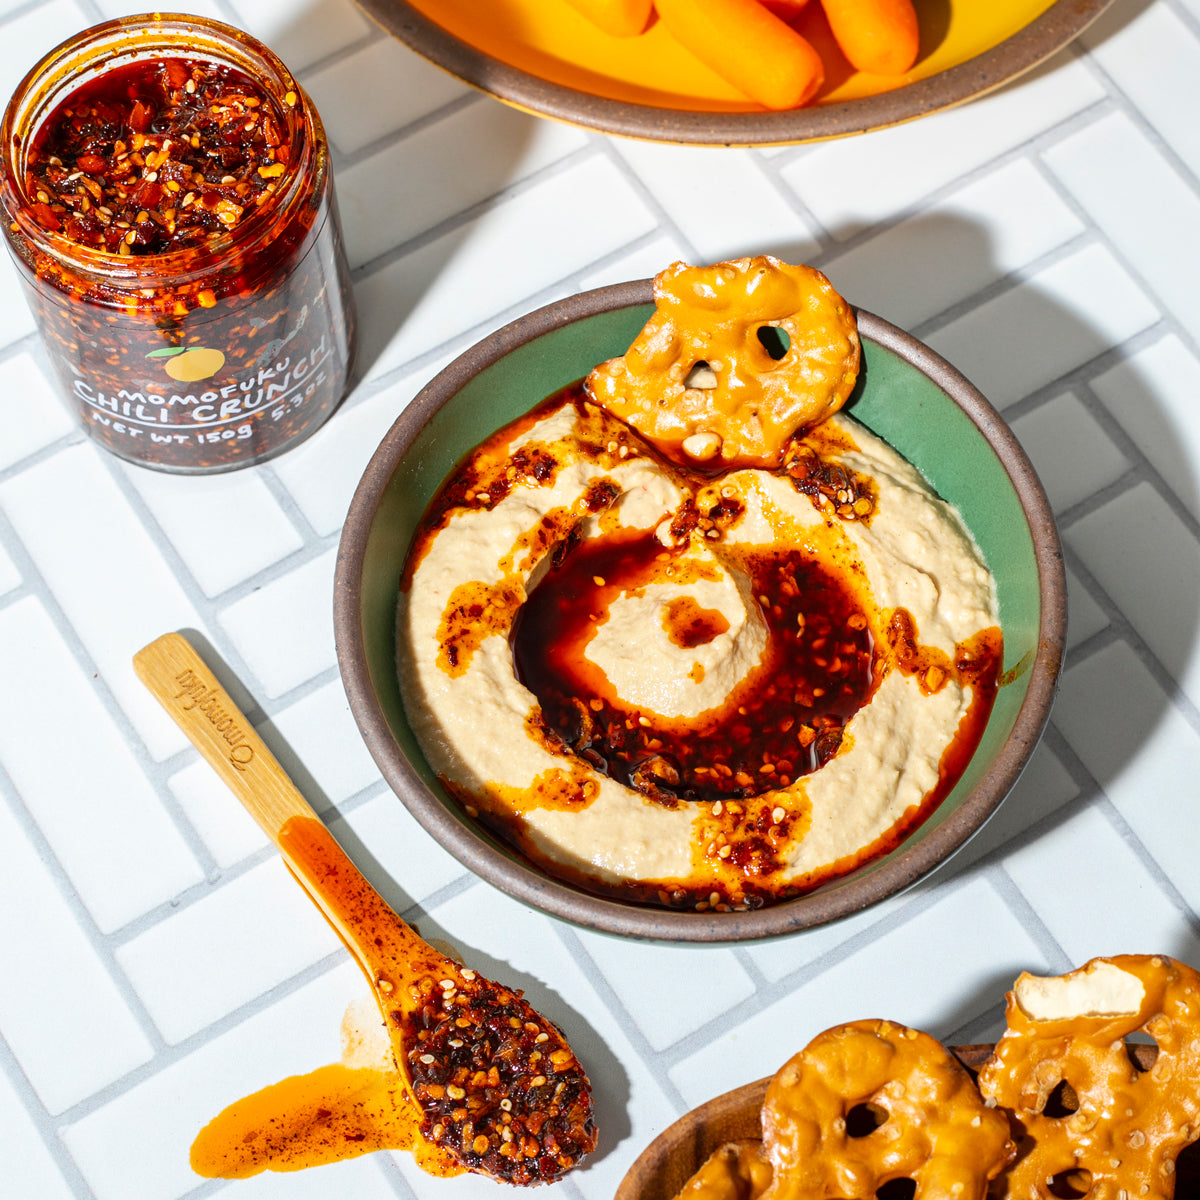 Chili crunch with hummus and pretzels